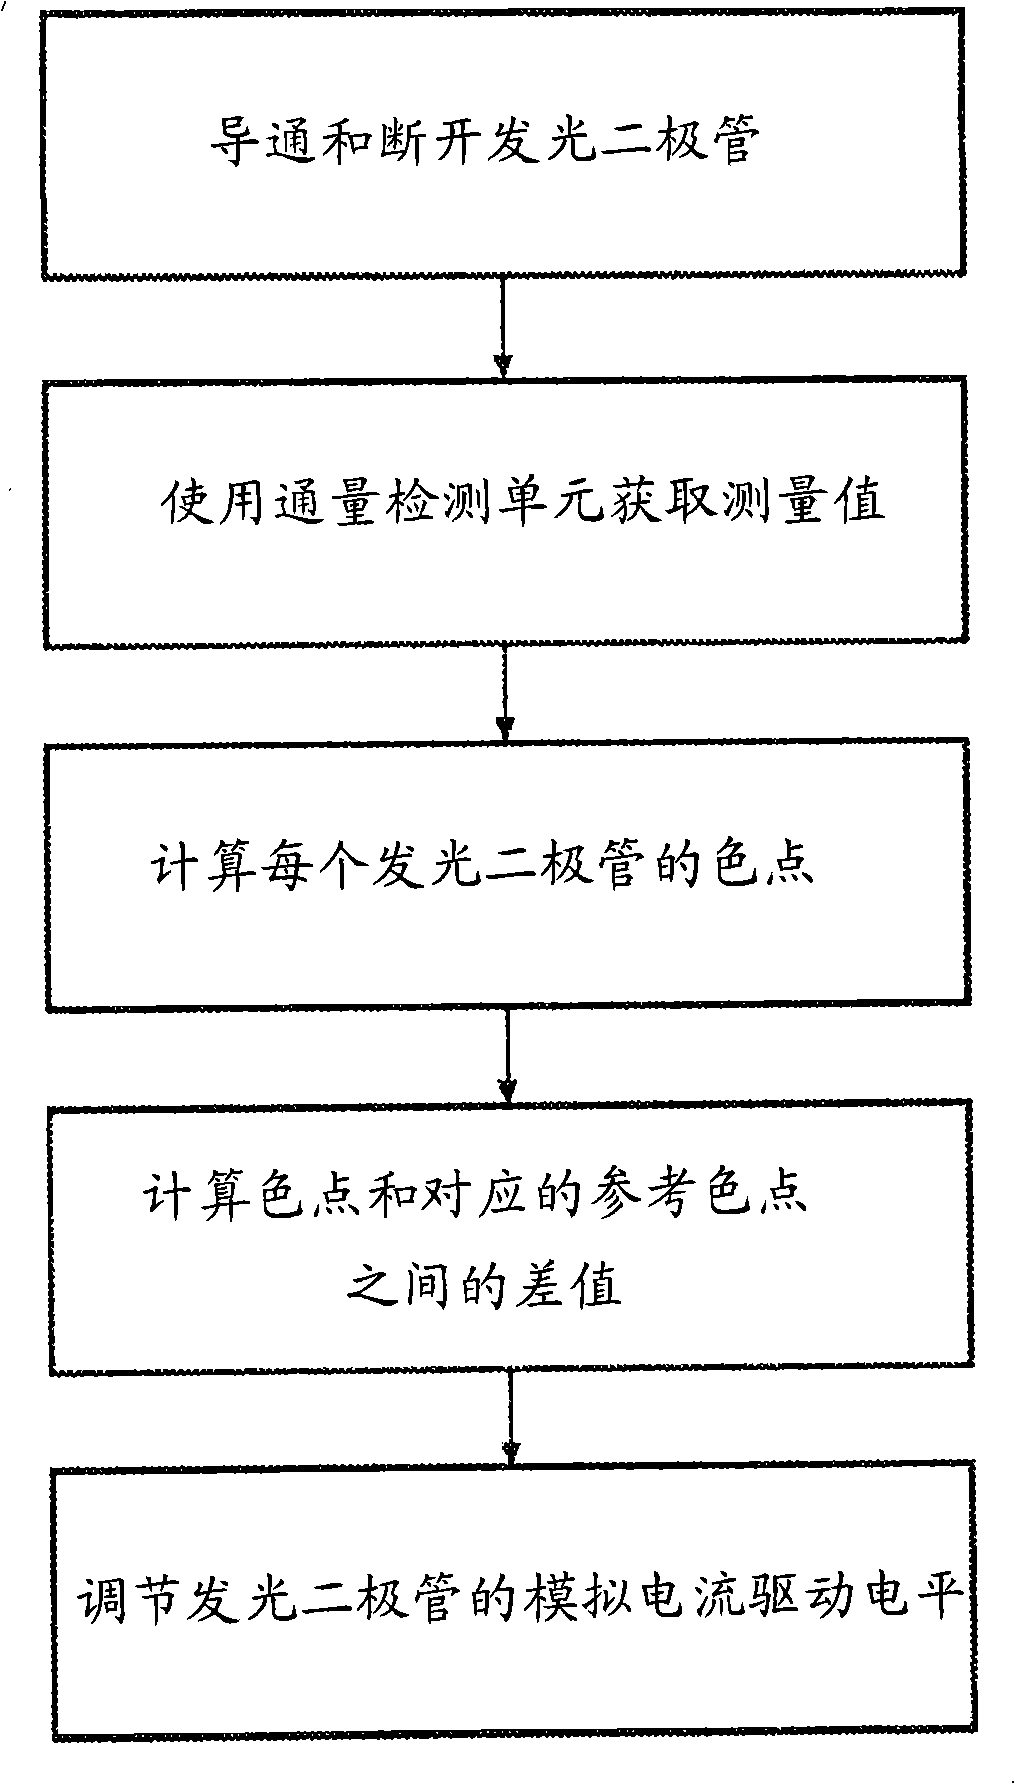 Illumination device and method for controlling an illumination device